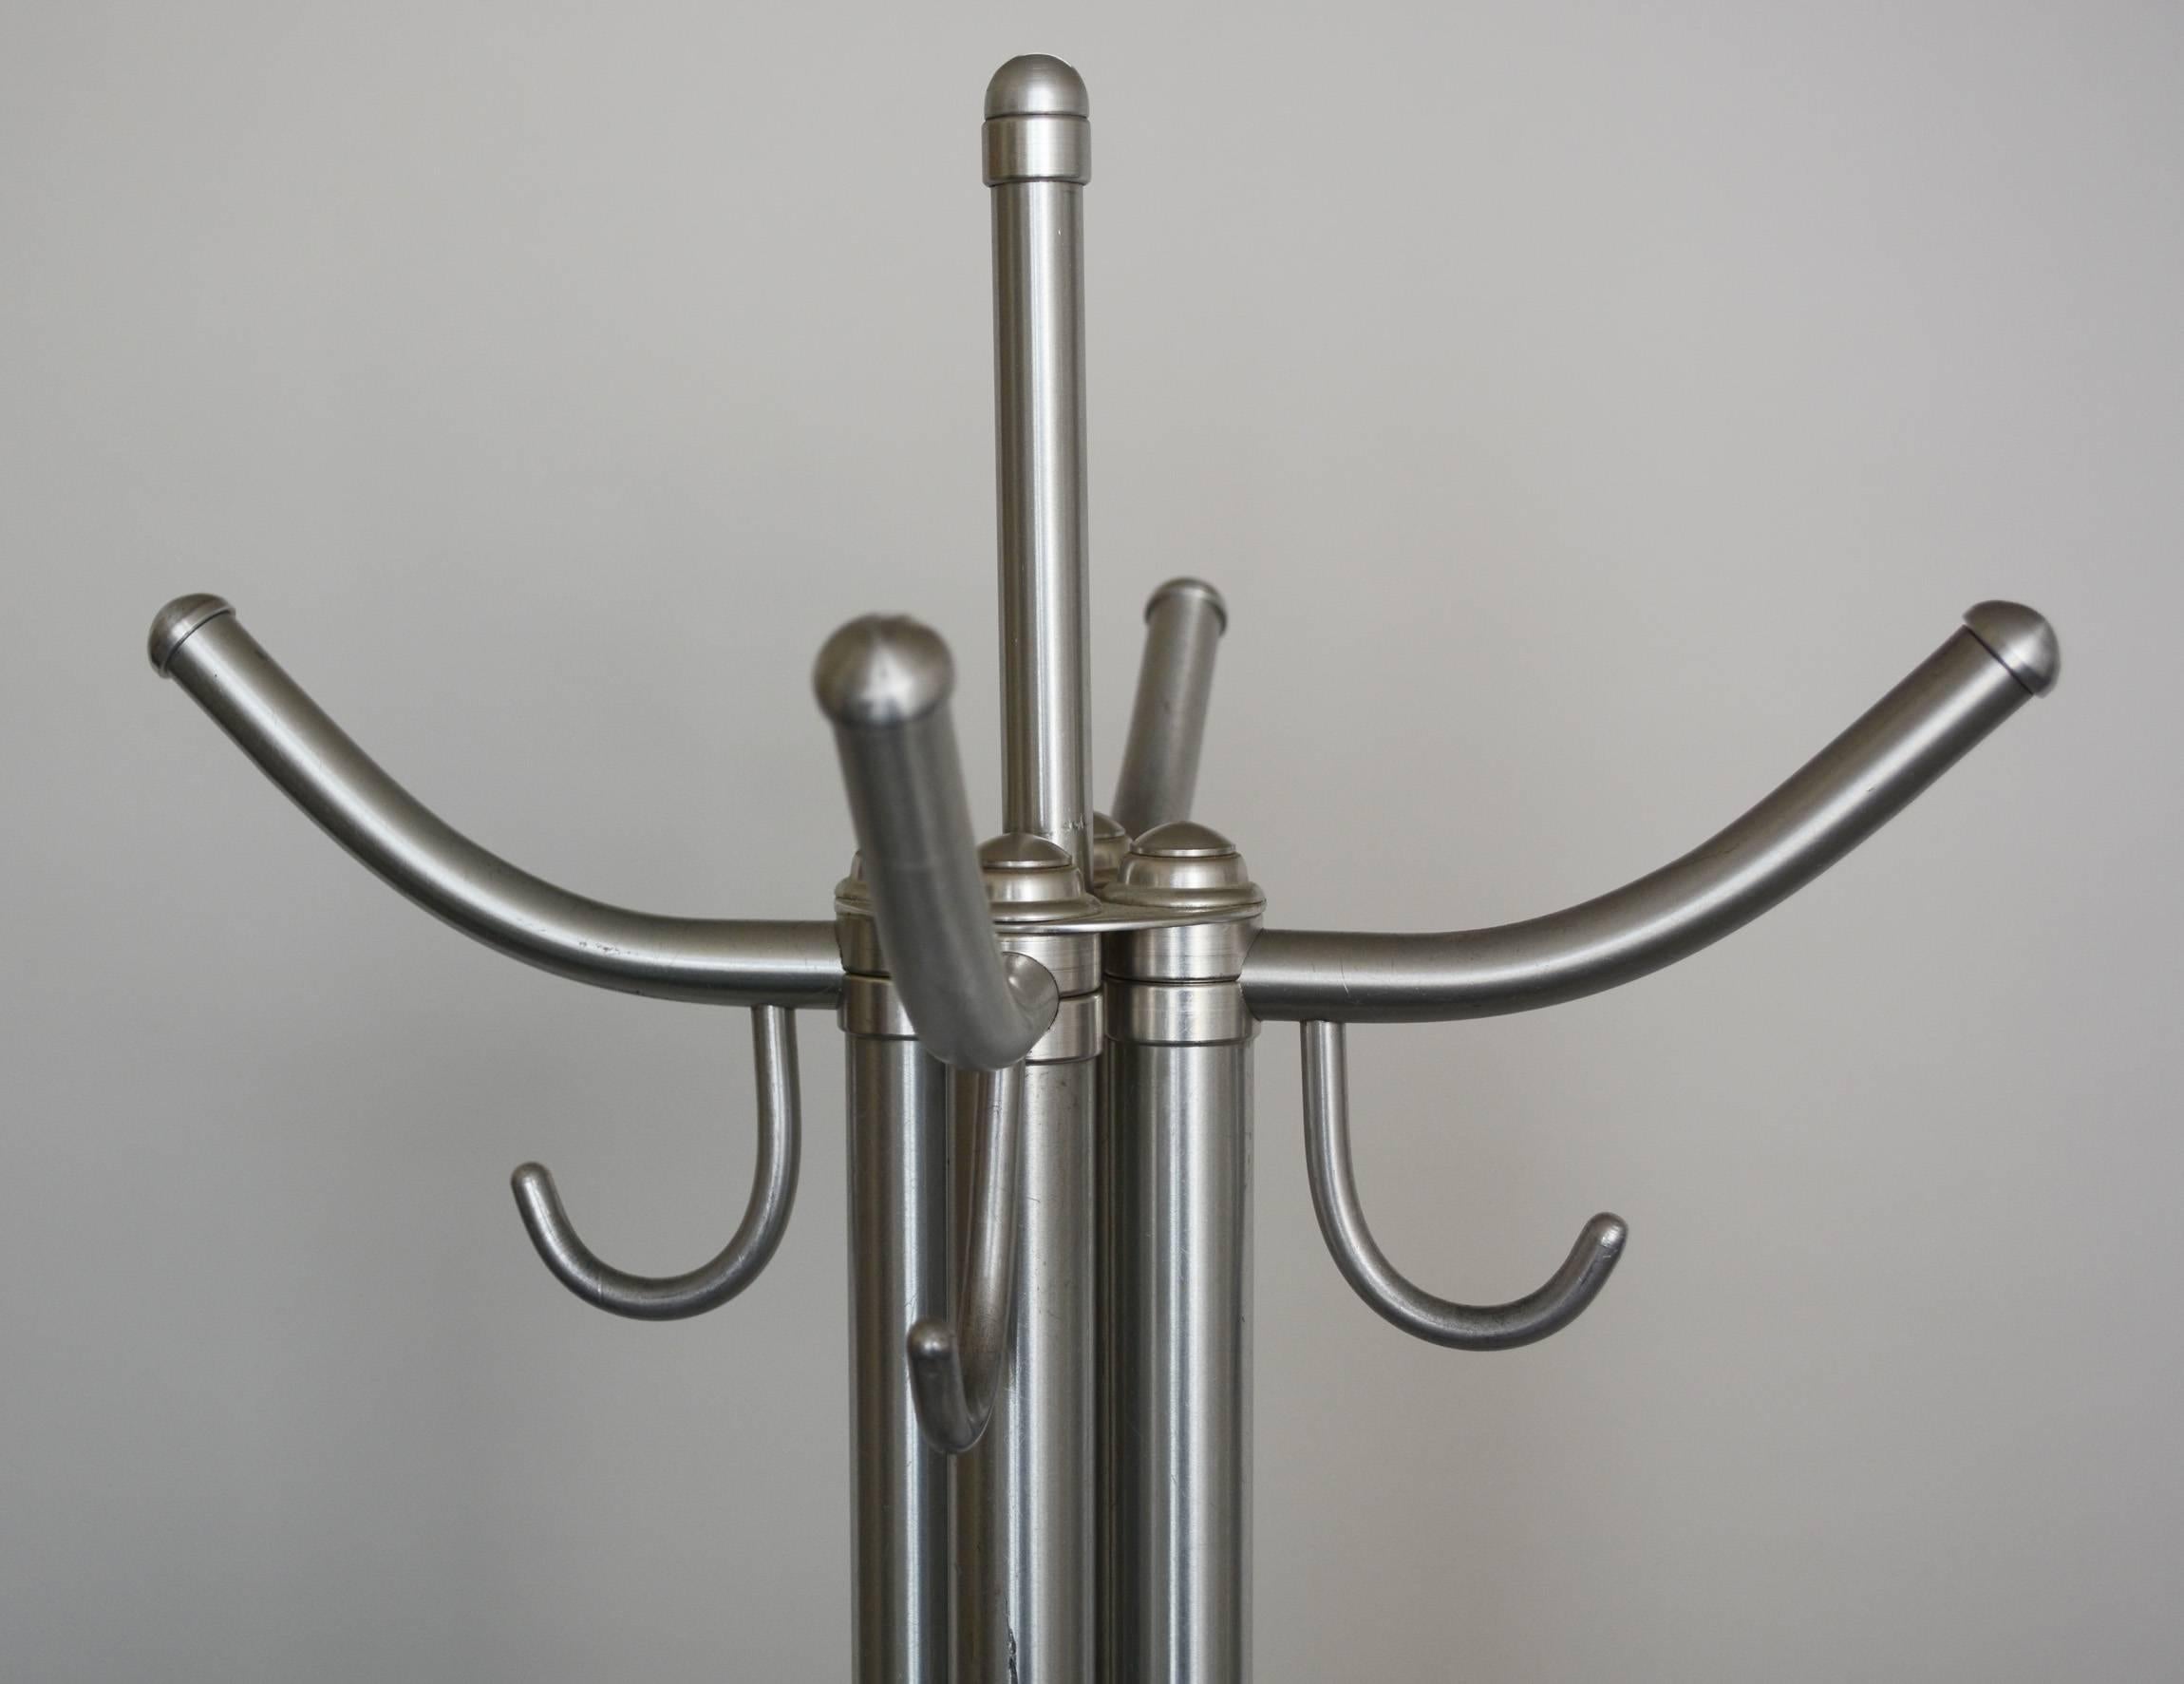 Aluminum coat rack by Warren McArthur. This rack has a slight lean to one side, see the last photo. There is some spots of wear to the aluminum.